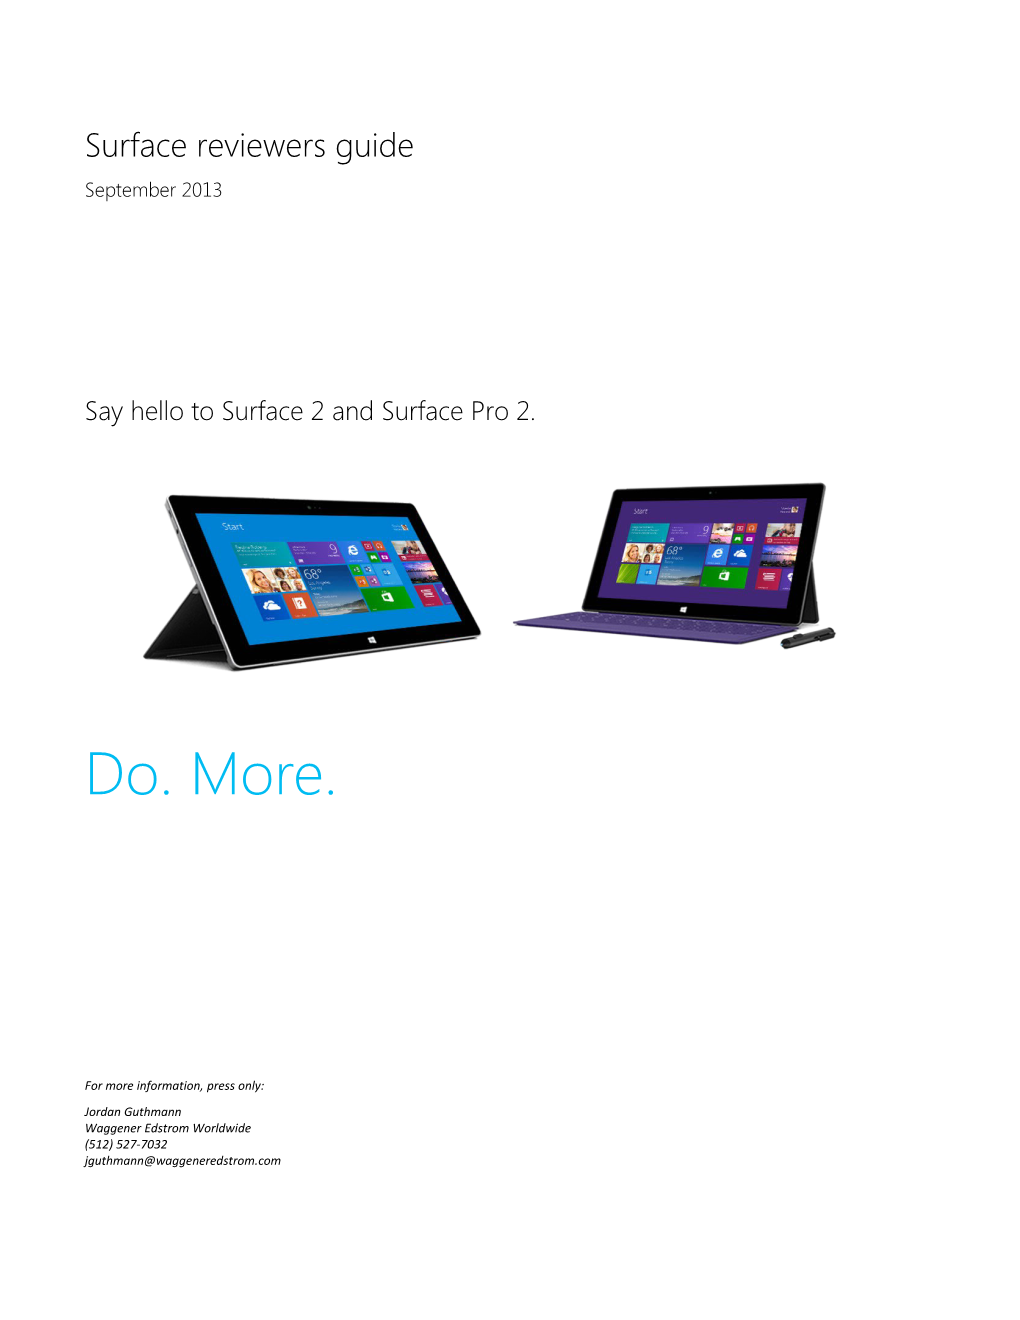 Surface Reviewers Guide